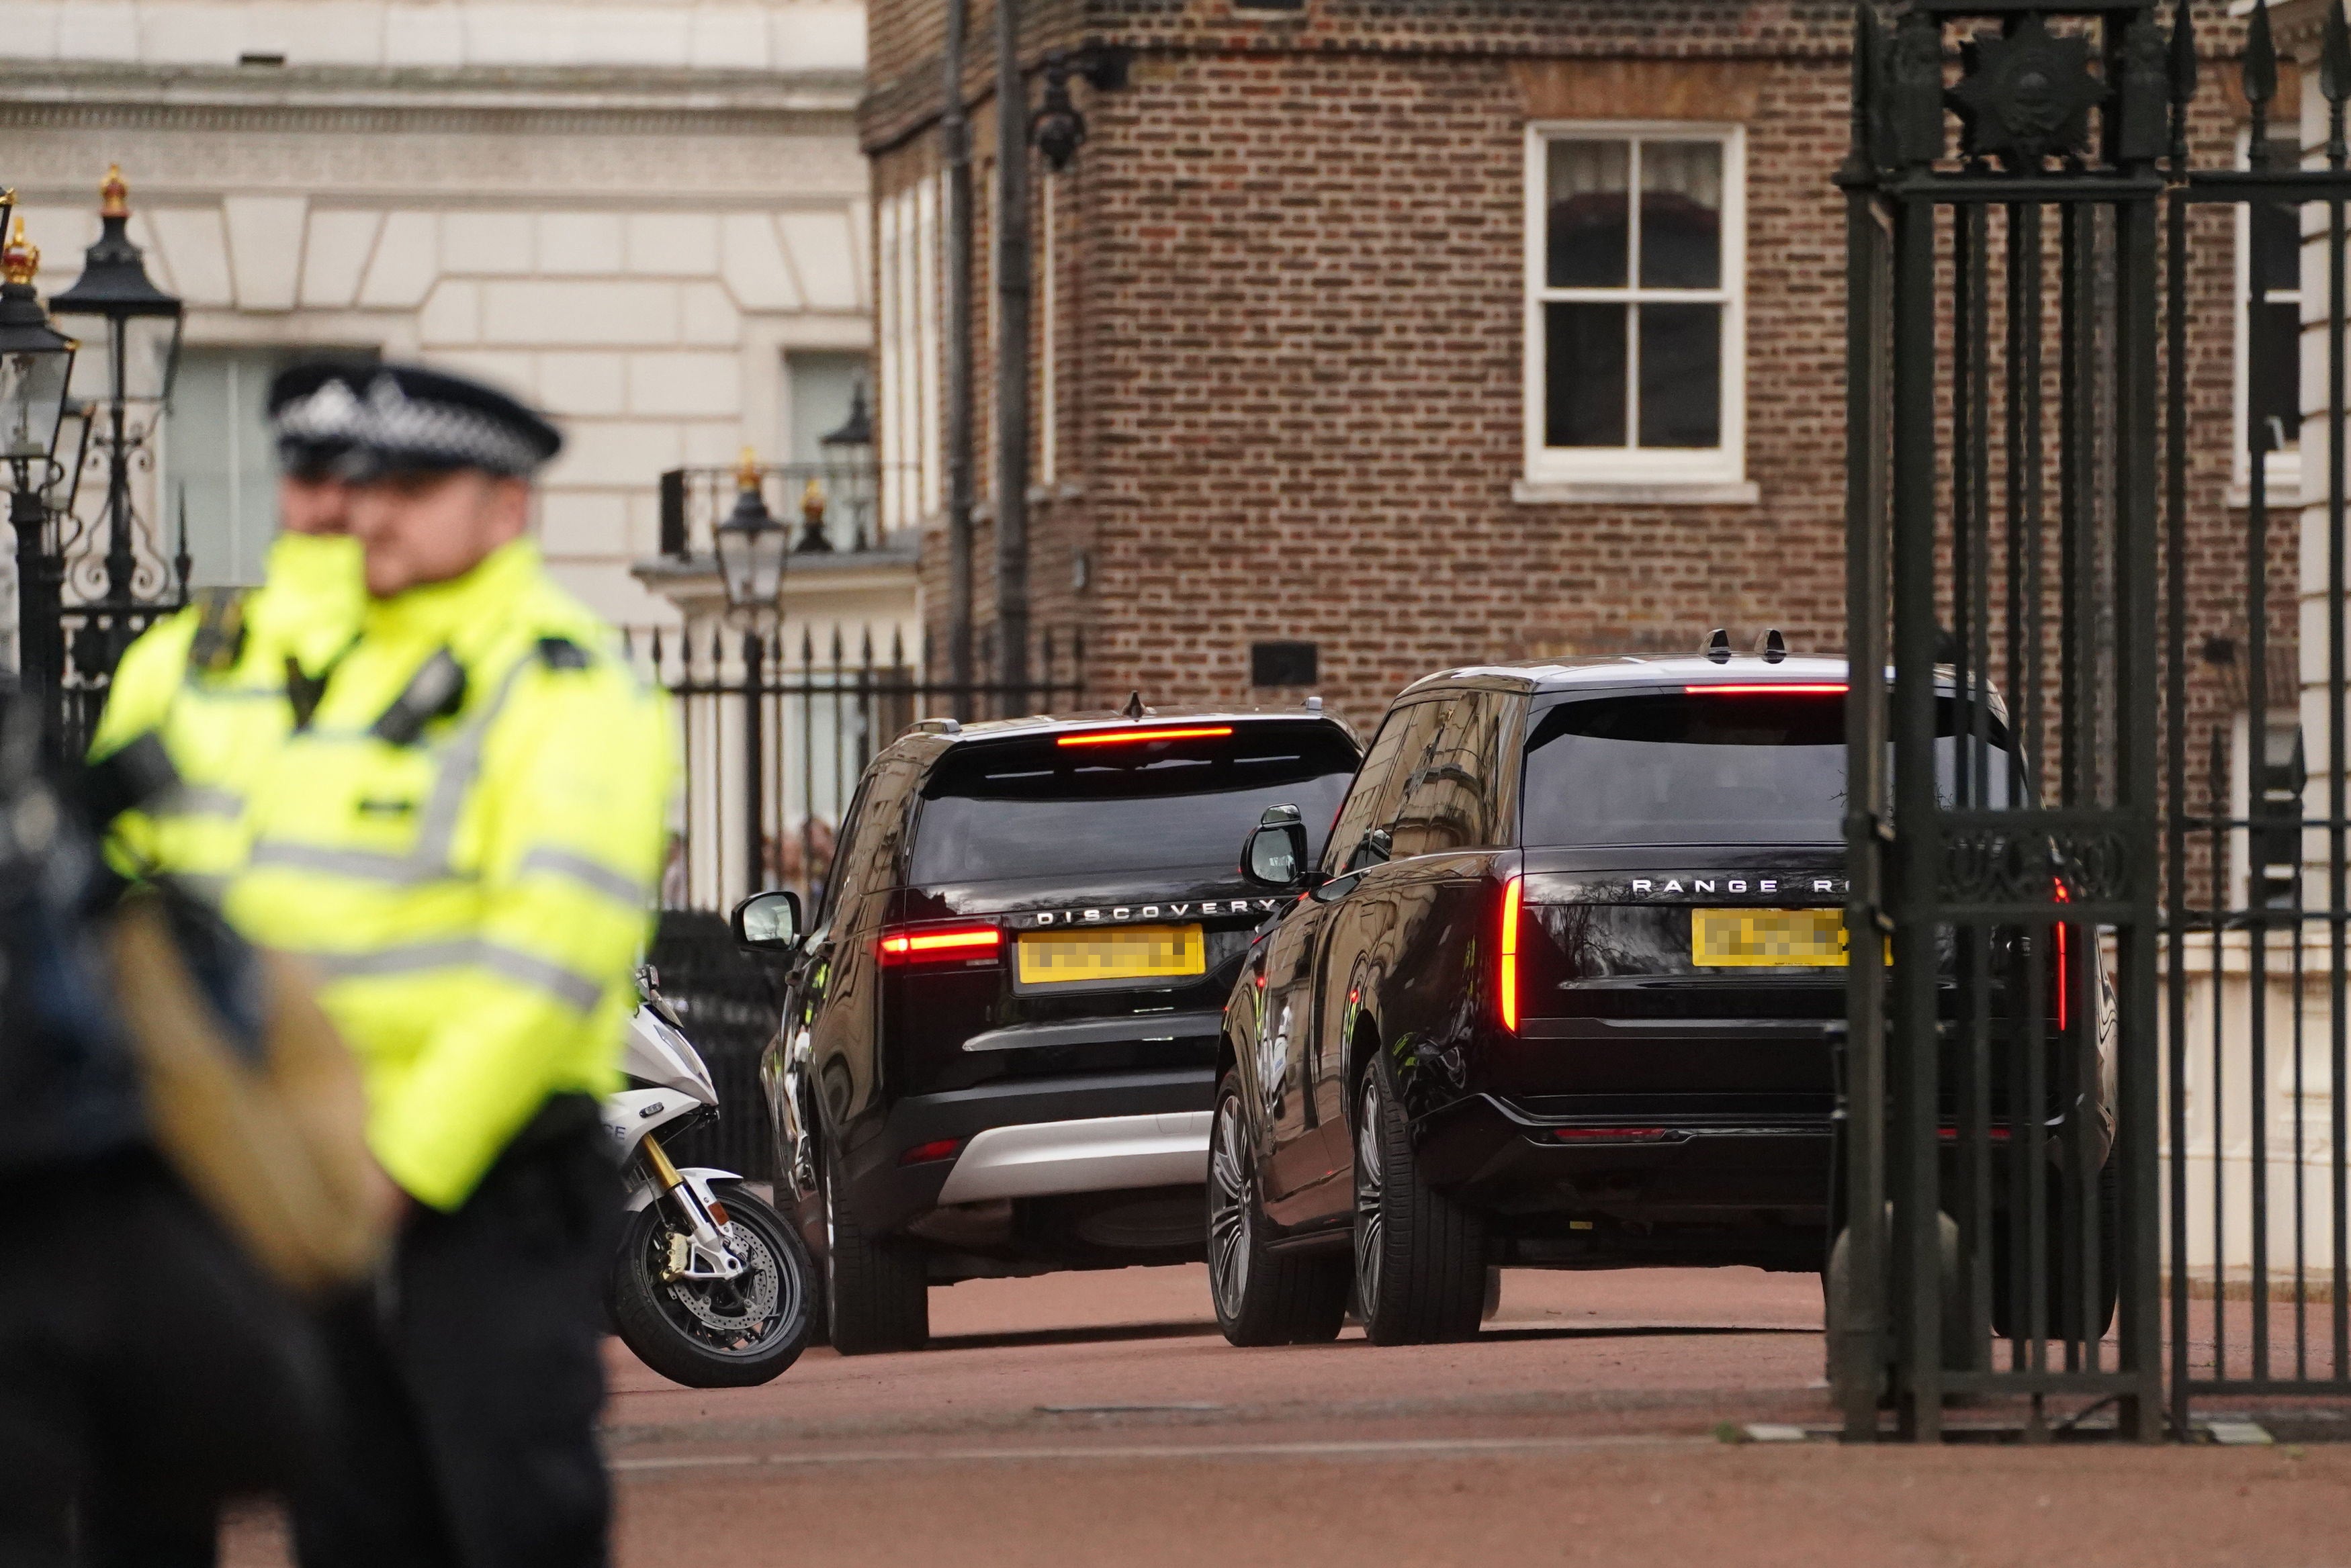 Two black SUVs, one believed to be carrying Prince Harry, arrive at Clarence House